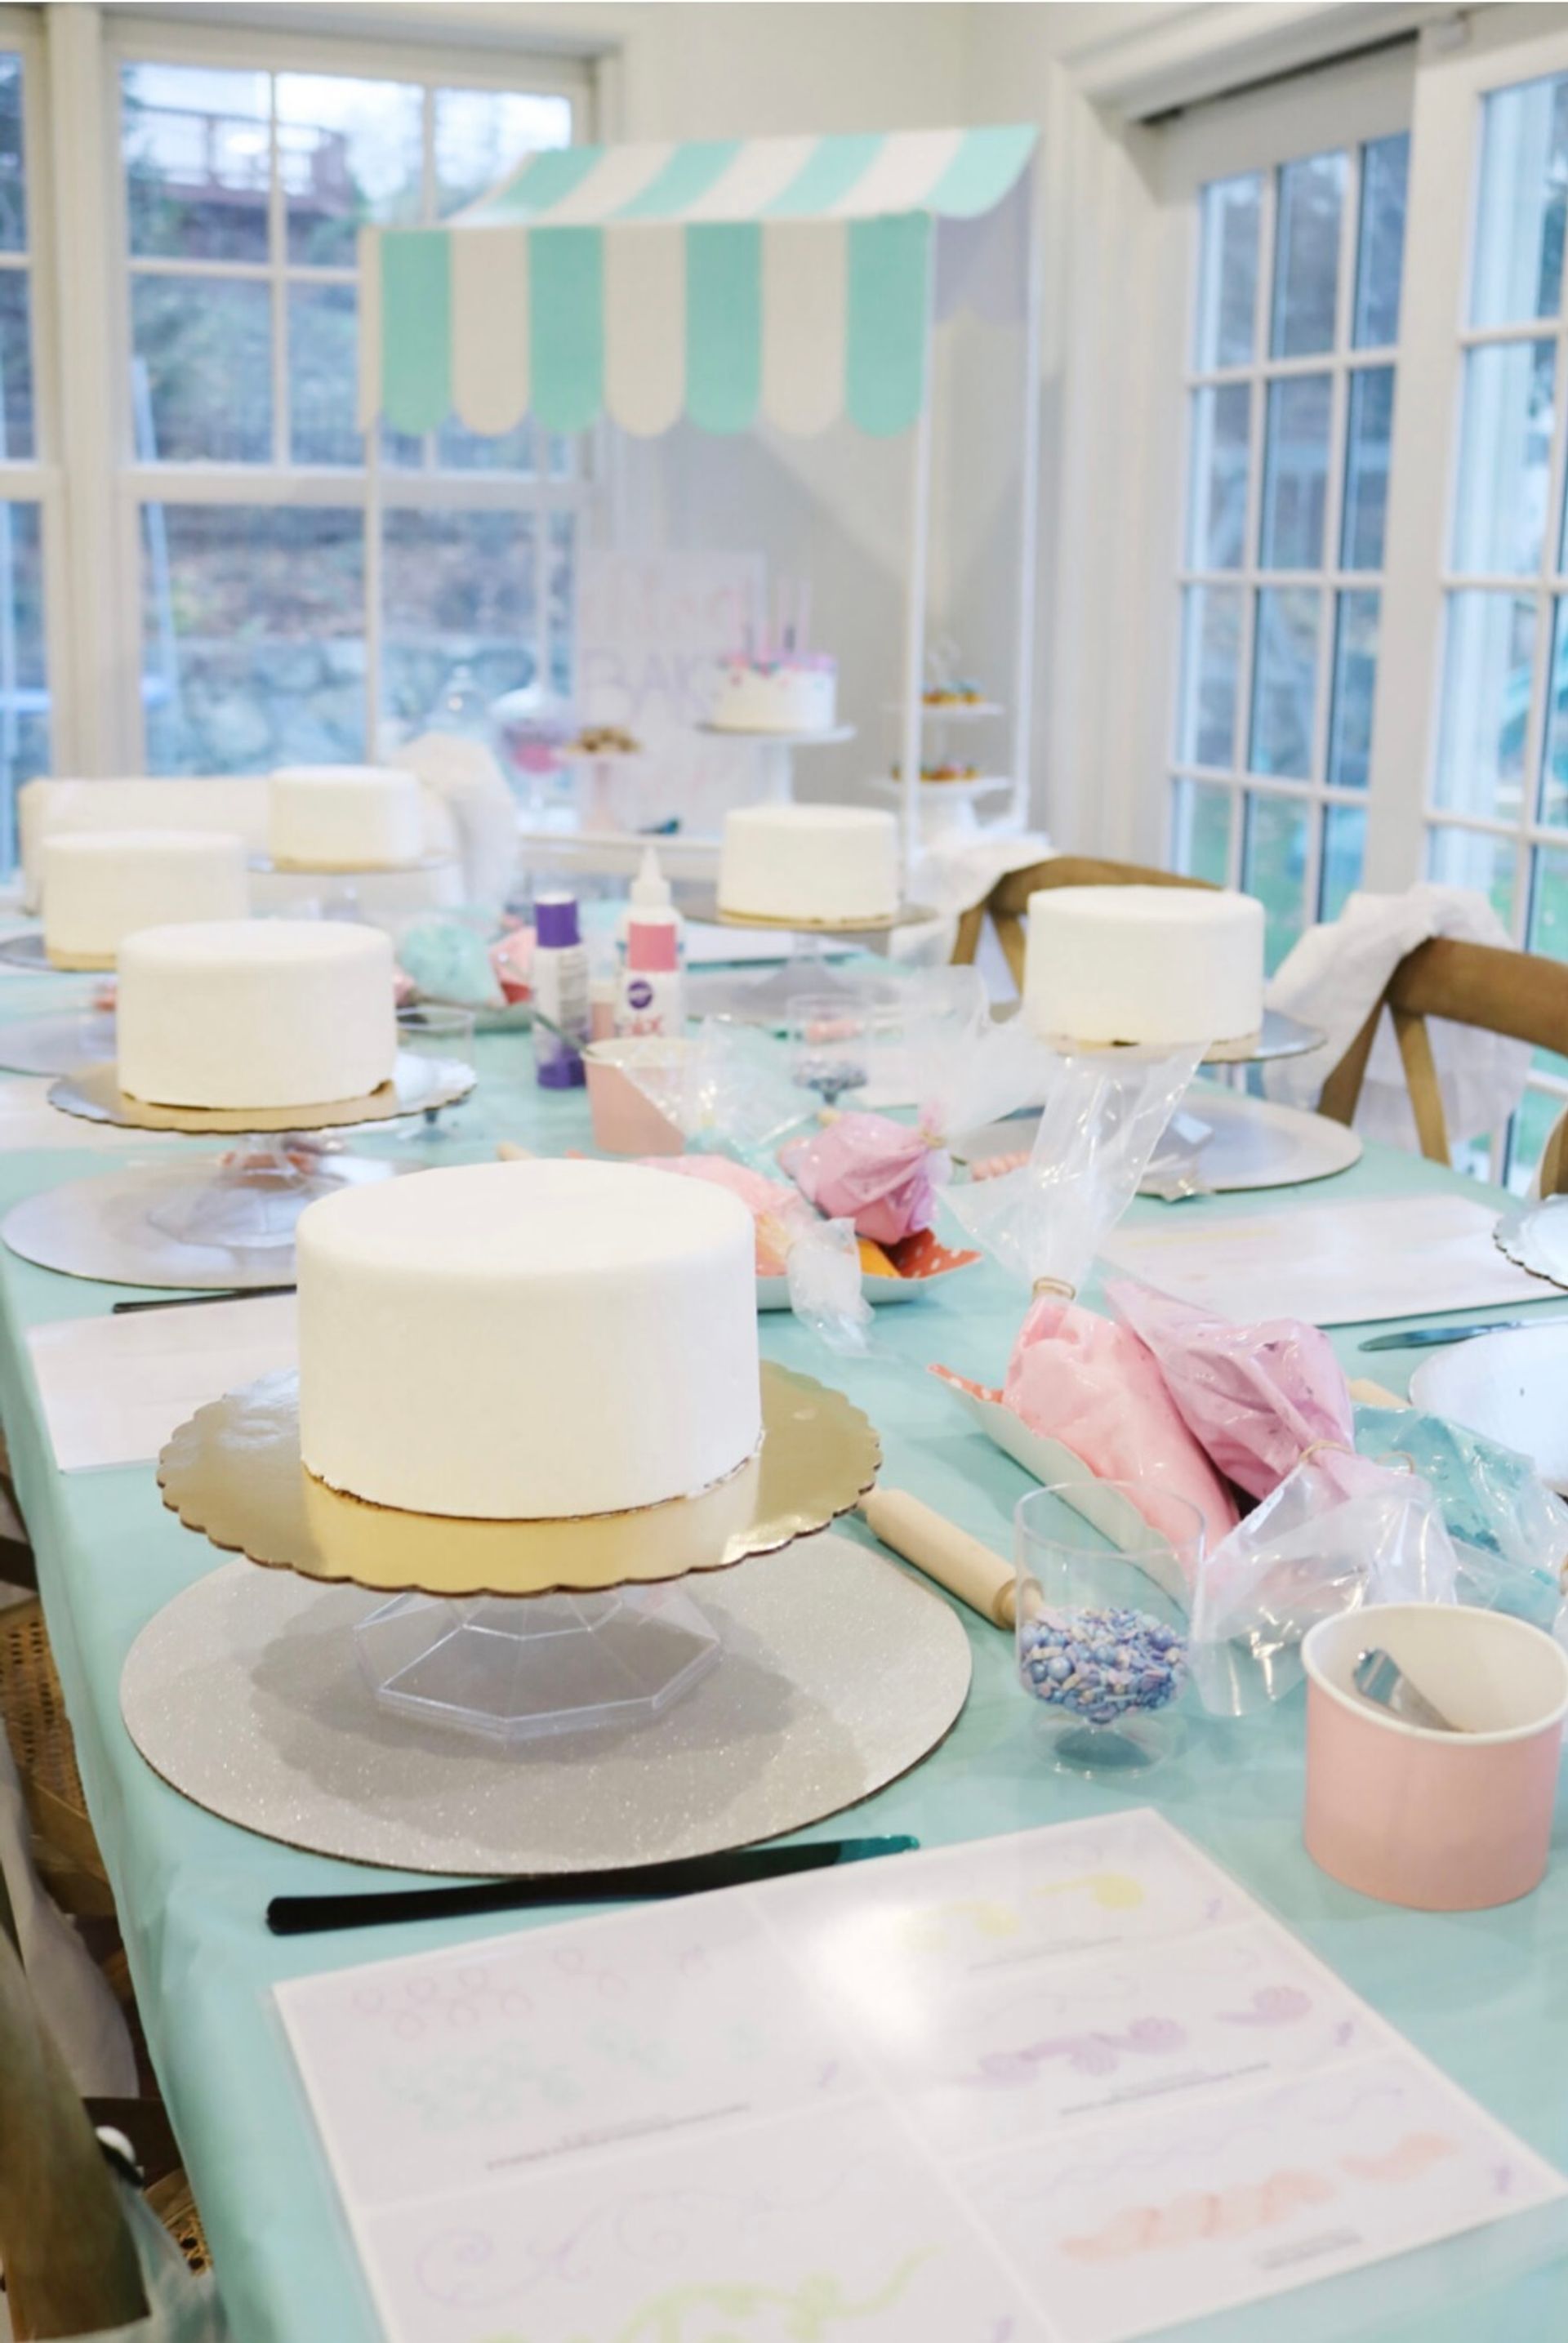 Cake ‘N Sip: Cake Decorating Class with BYO Drinks, Decorations & Music image 1